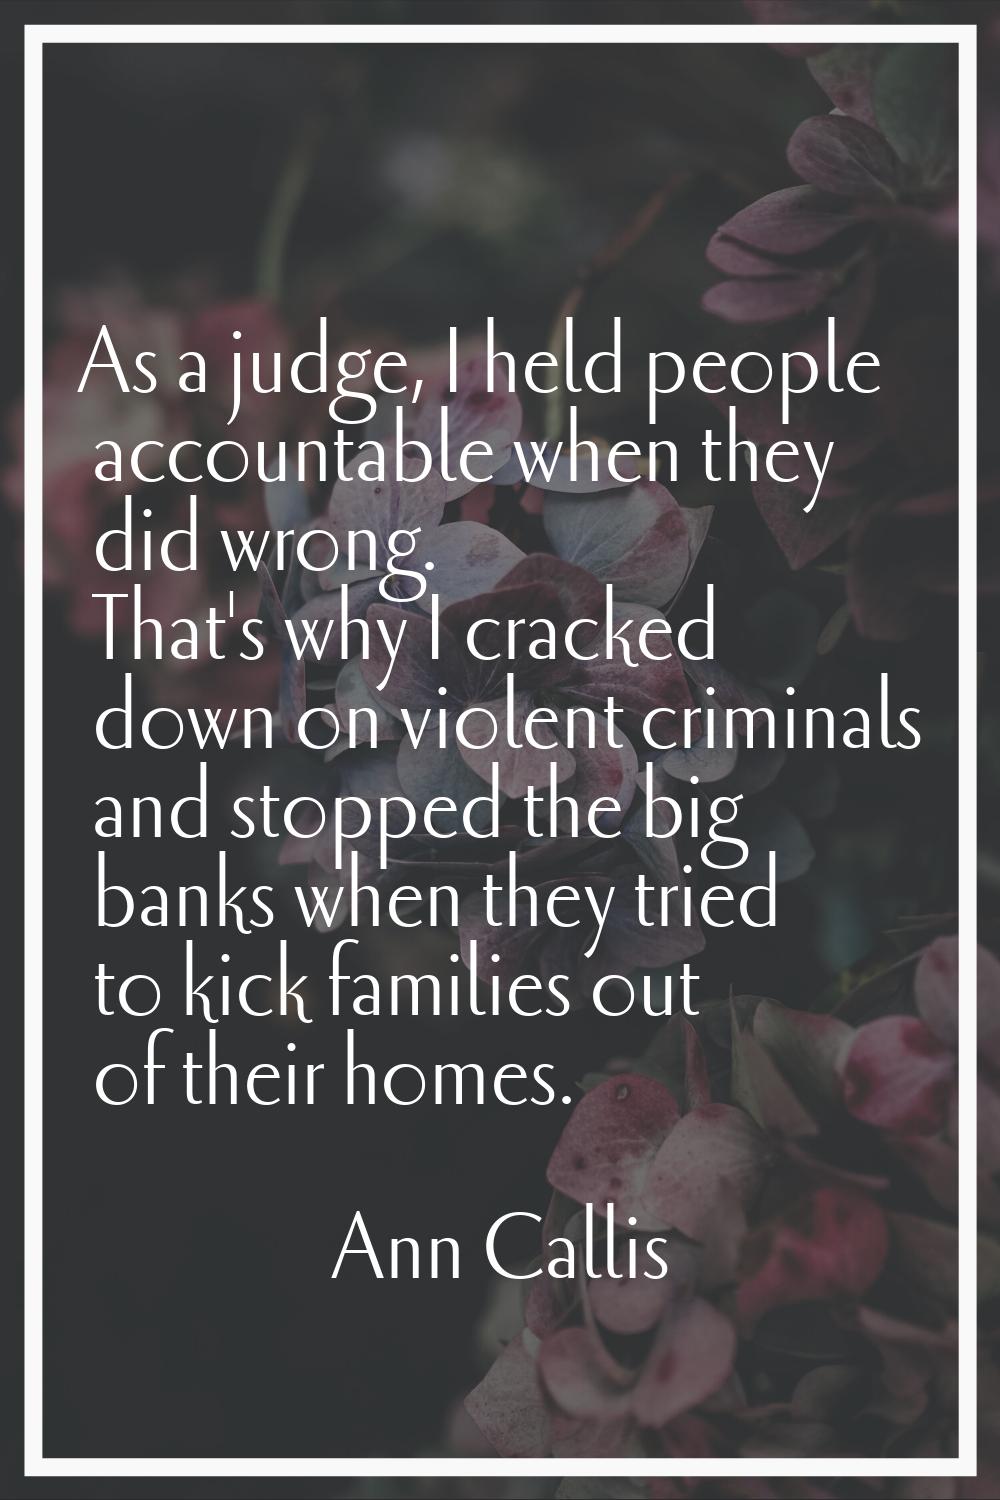 As a judge, I held people accountable when they did wrong. That's why I cracked down on violent cri